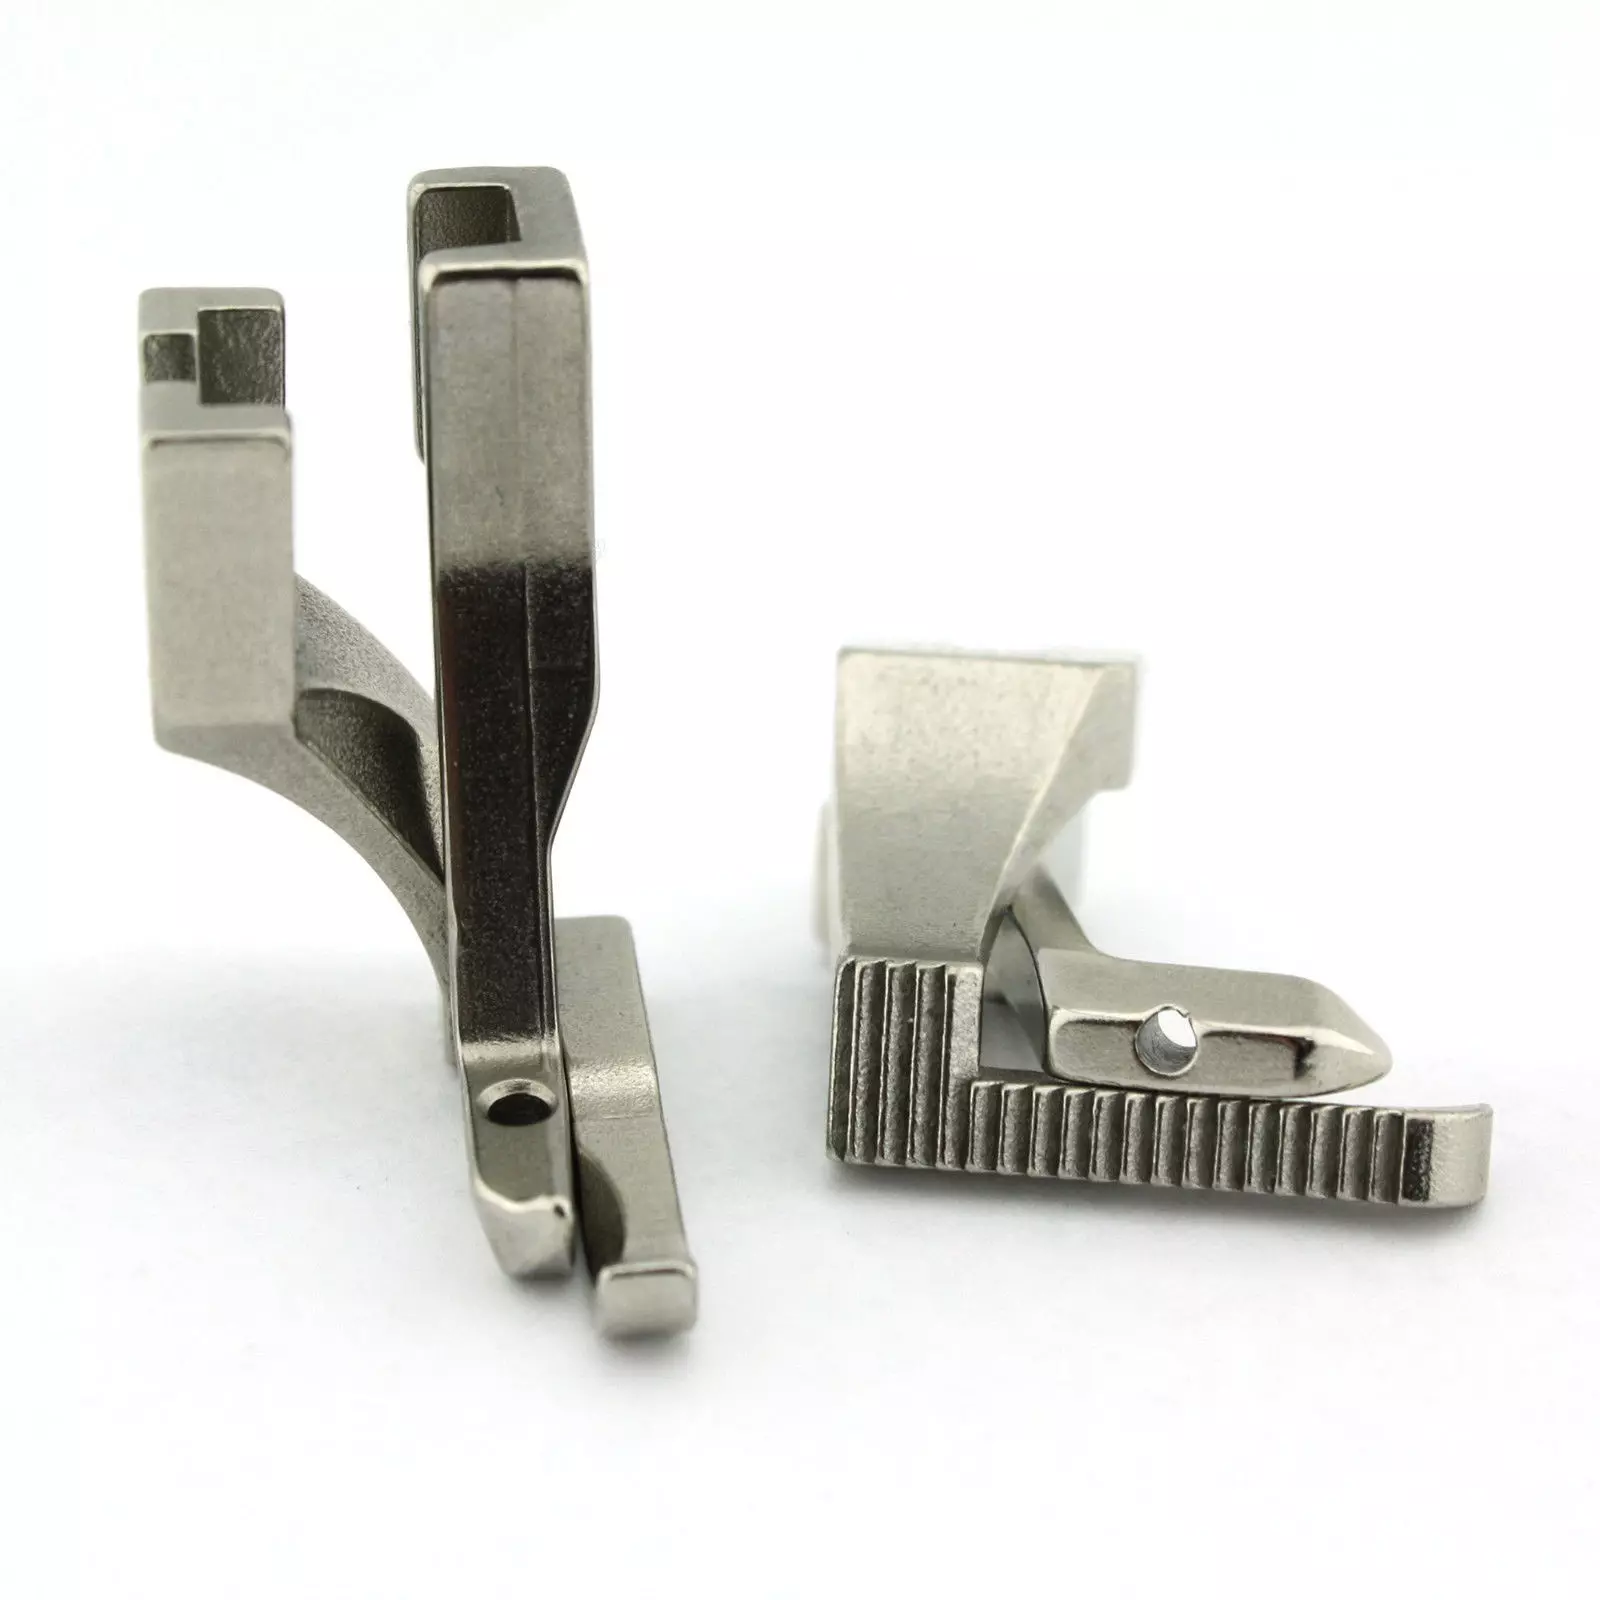 A COOL】 1pc Sewing Tool Clearance Plate Button Reed Presser Foot